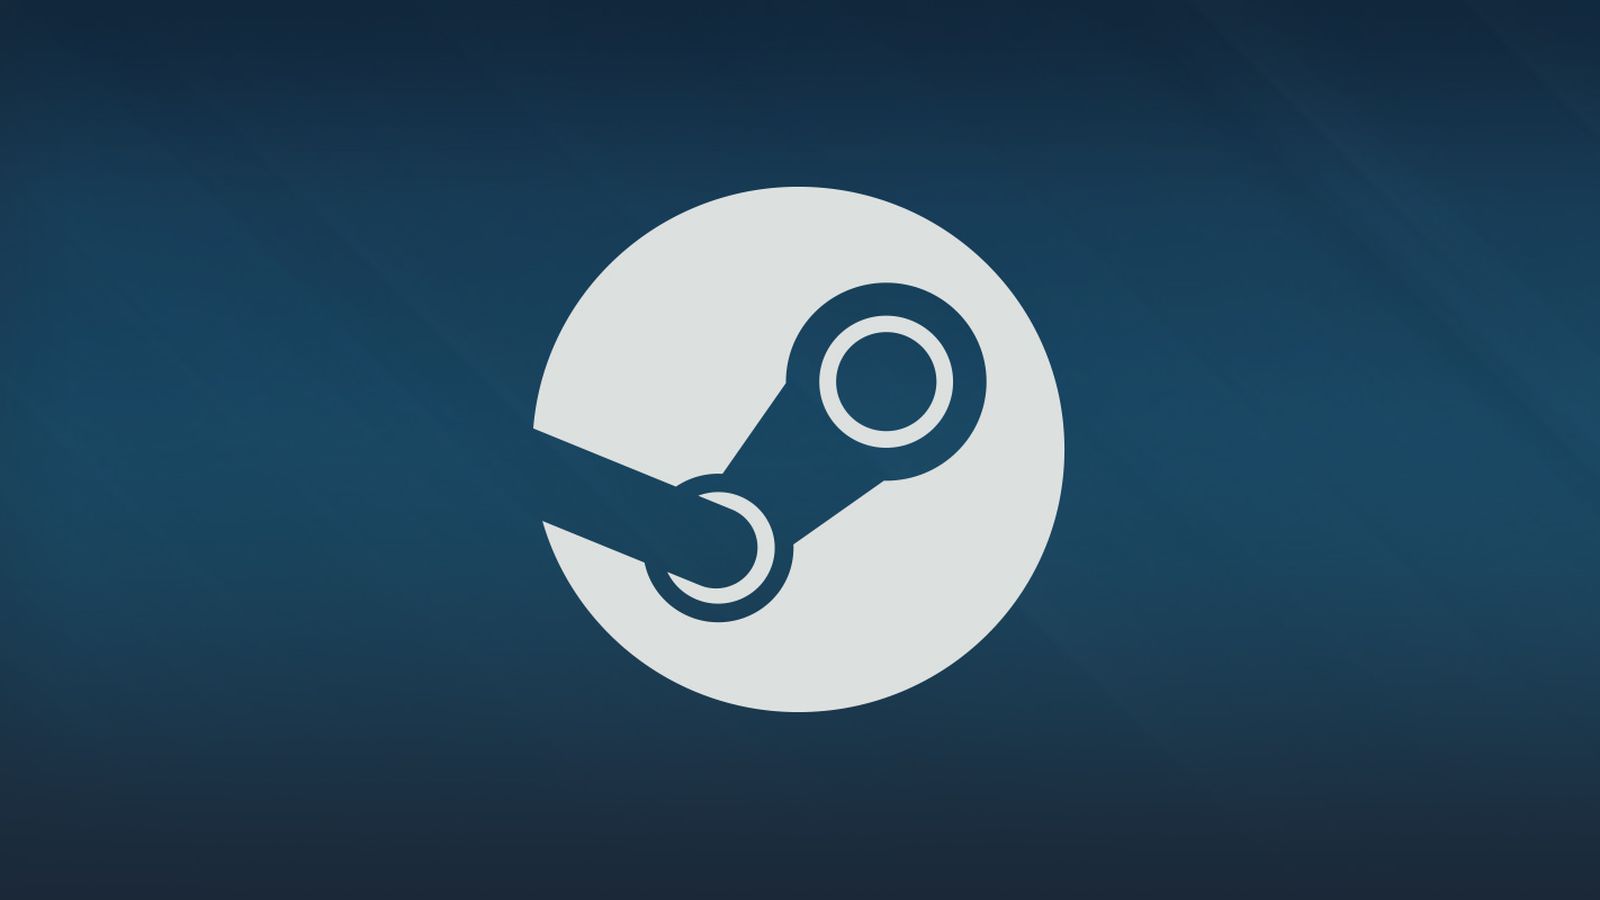 Image for Steam Fall Sale is live and you can also nominate your favorite games for the 2019 Steam Awards